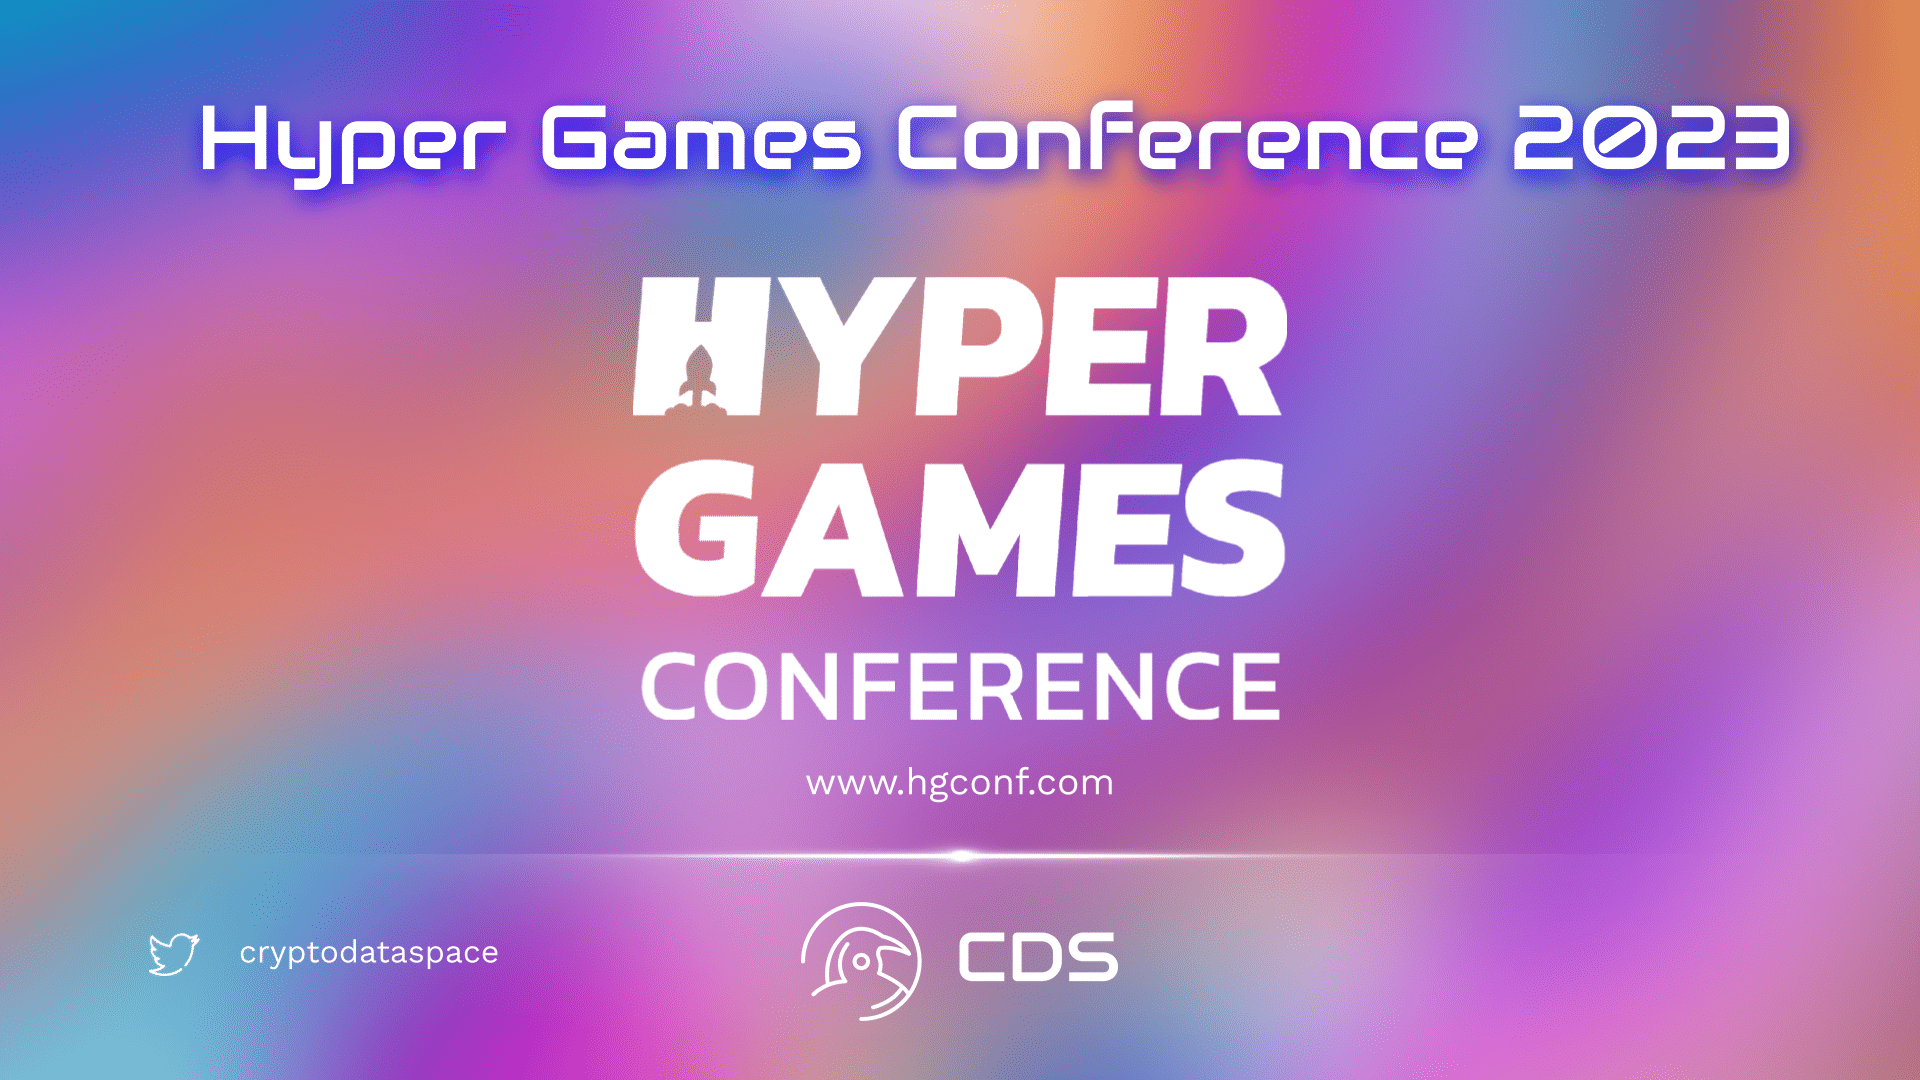 Hyper Games Conference 2023